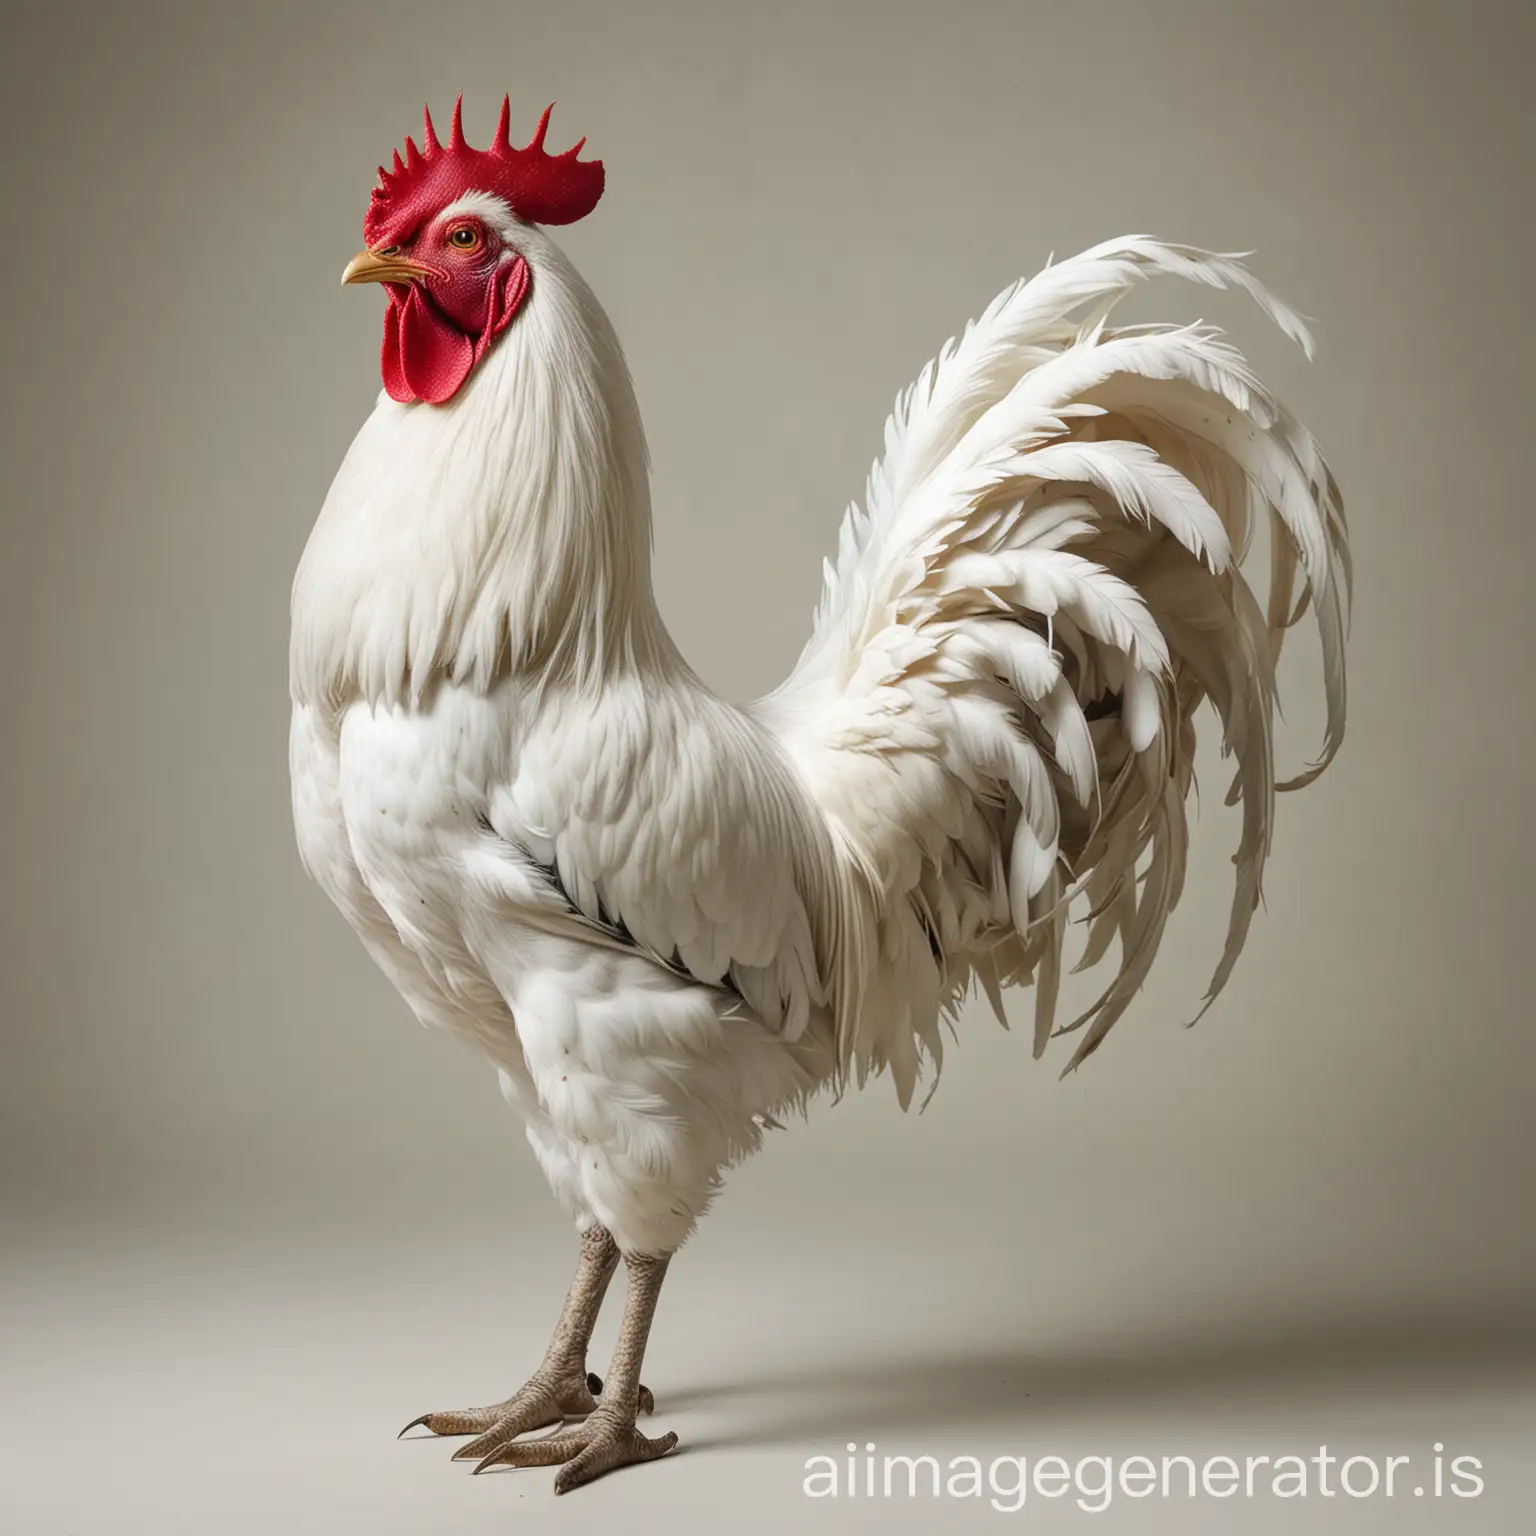 Draw a photo that has a full-length rooster standing, white in color, and facing the camera